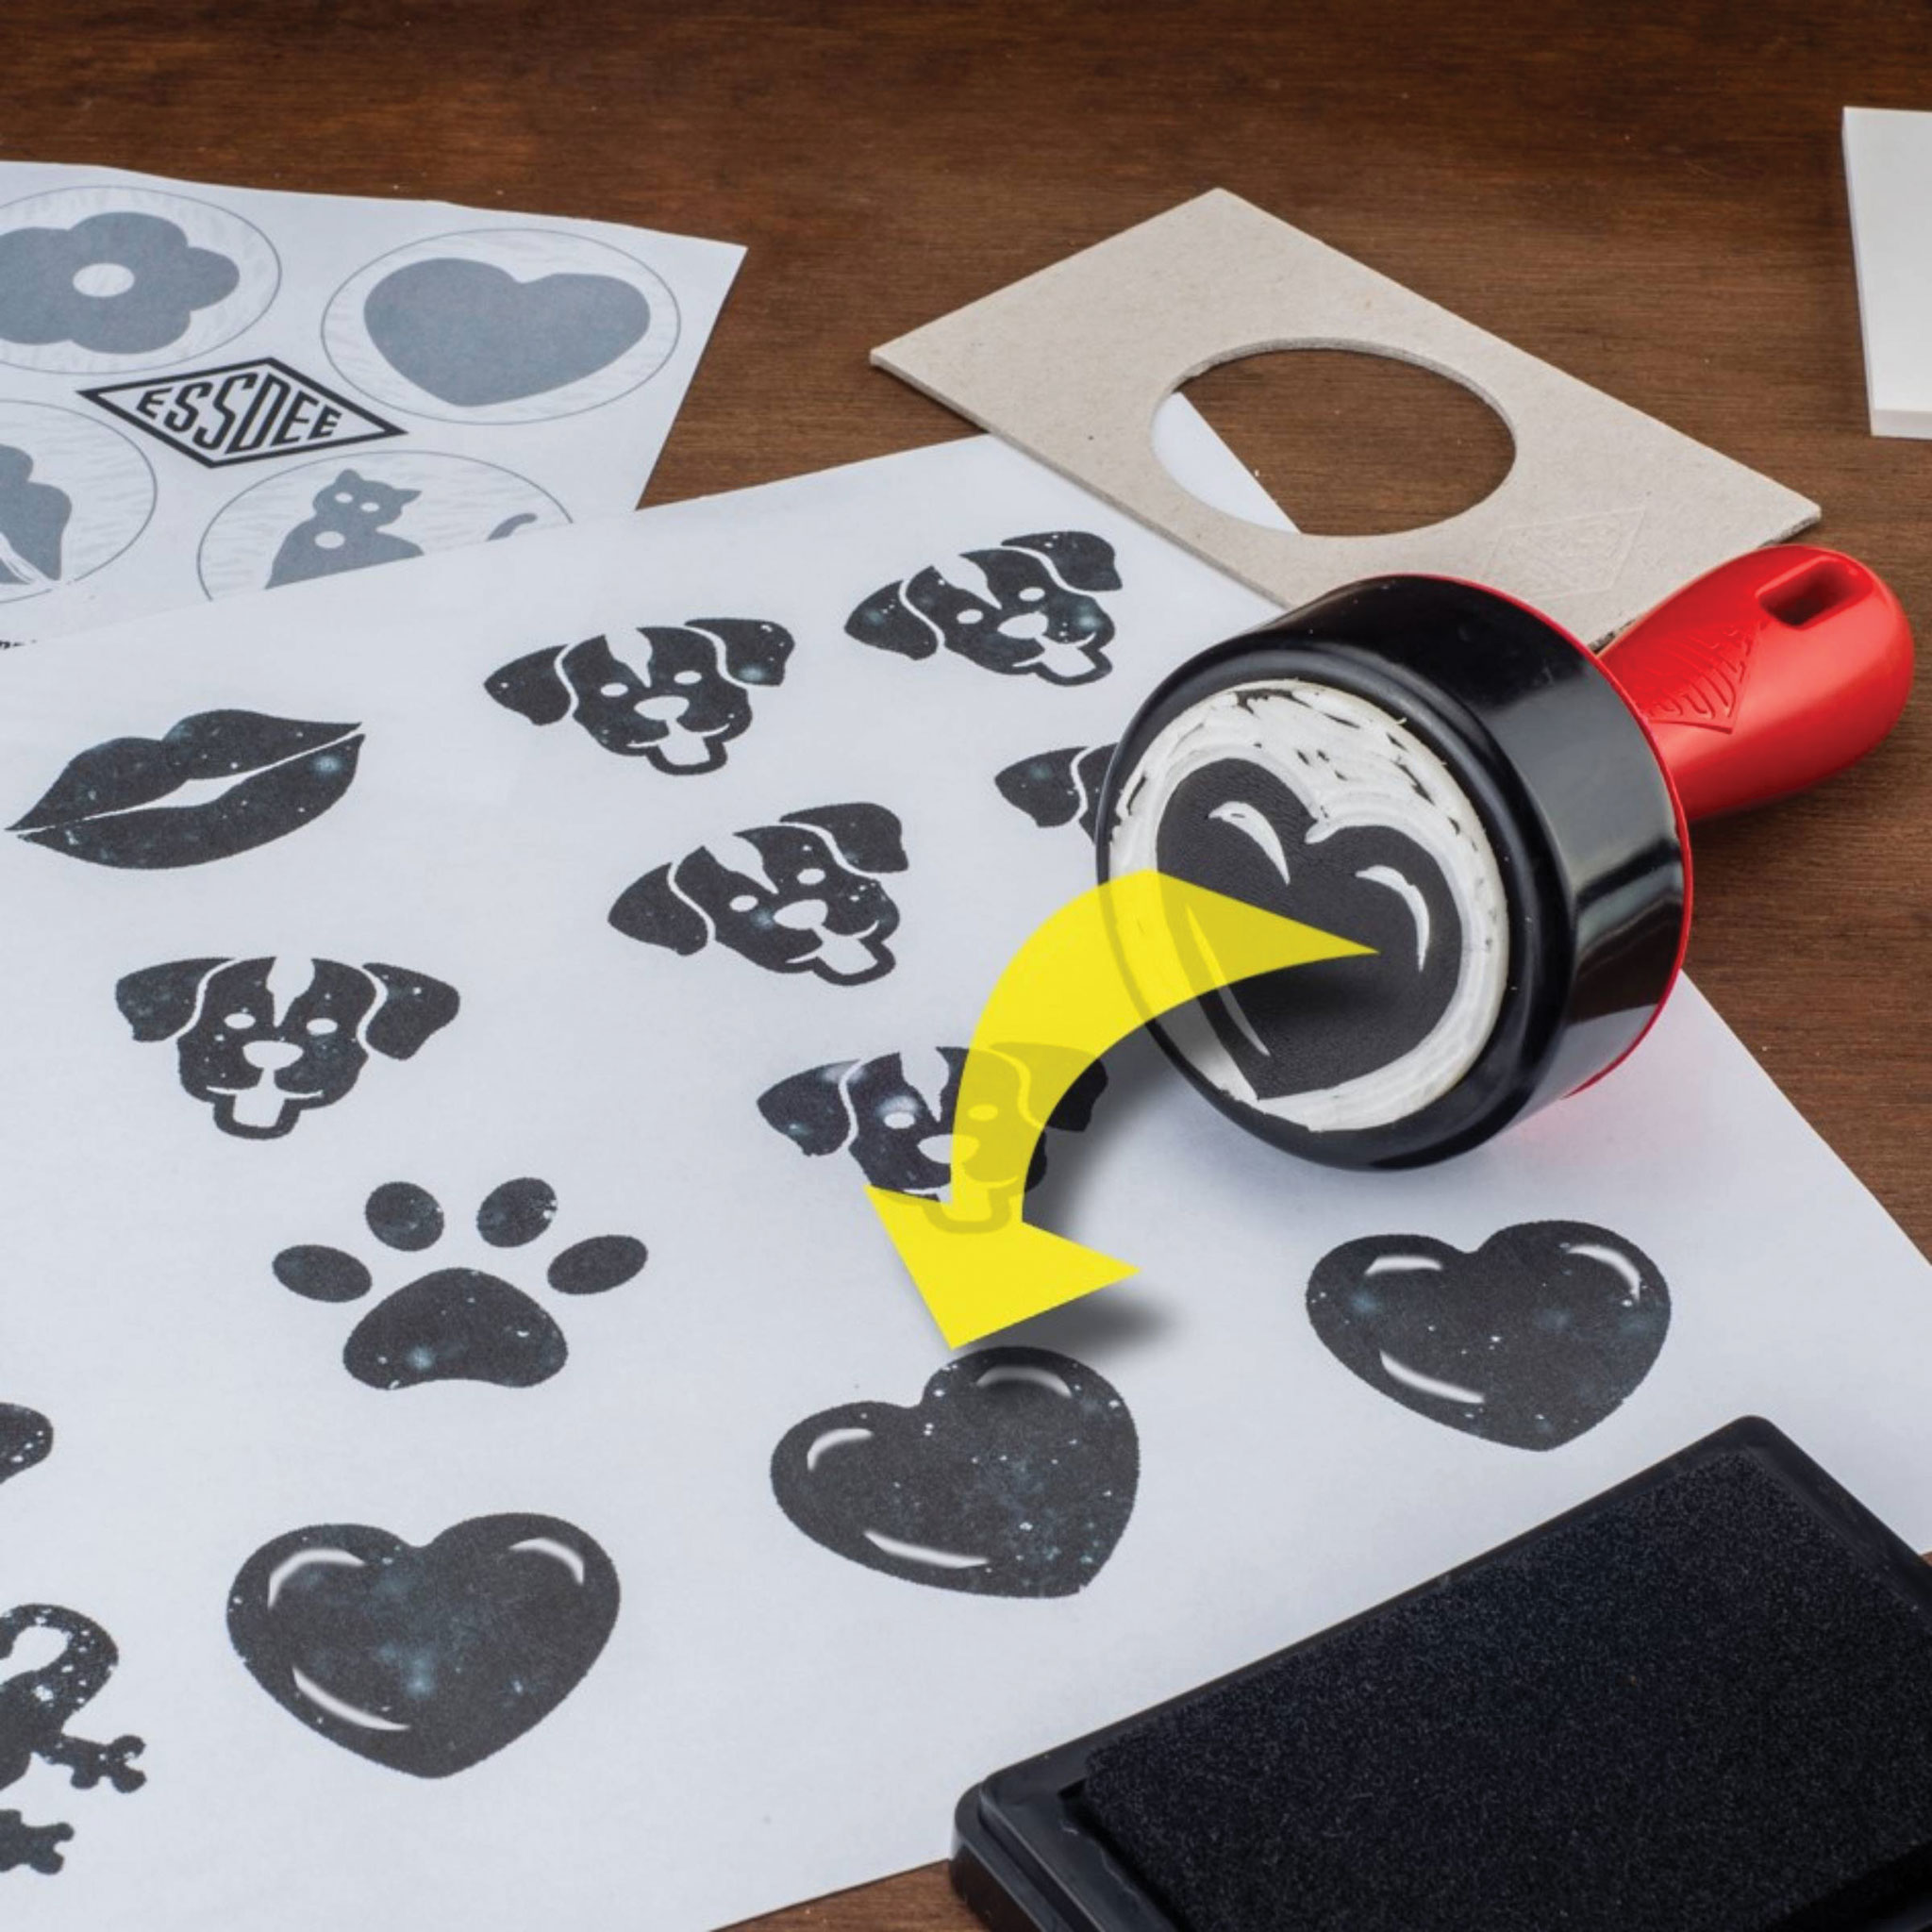 Making Our Own Rubber Stamps  Essdee Stamp Carving Kit 